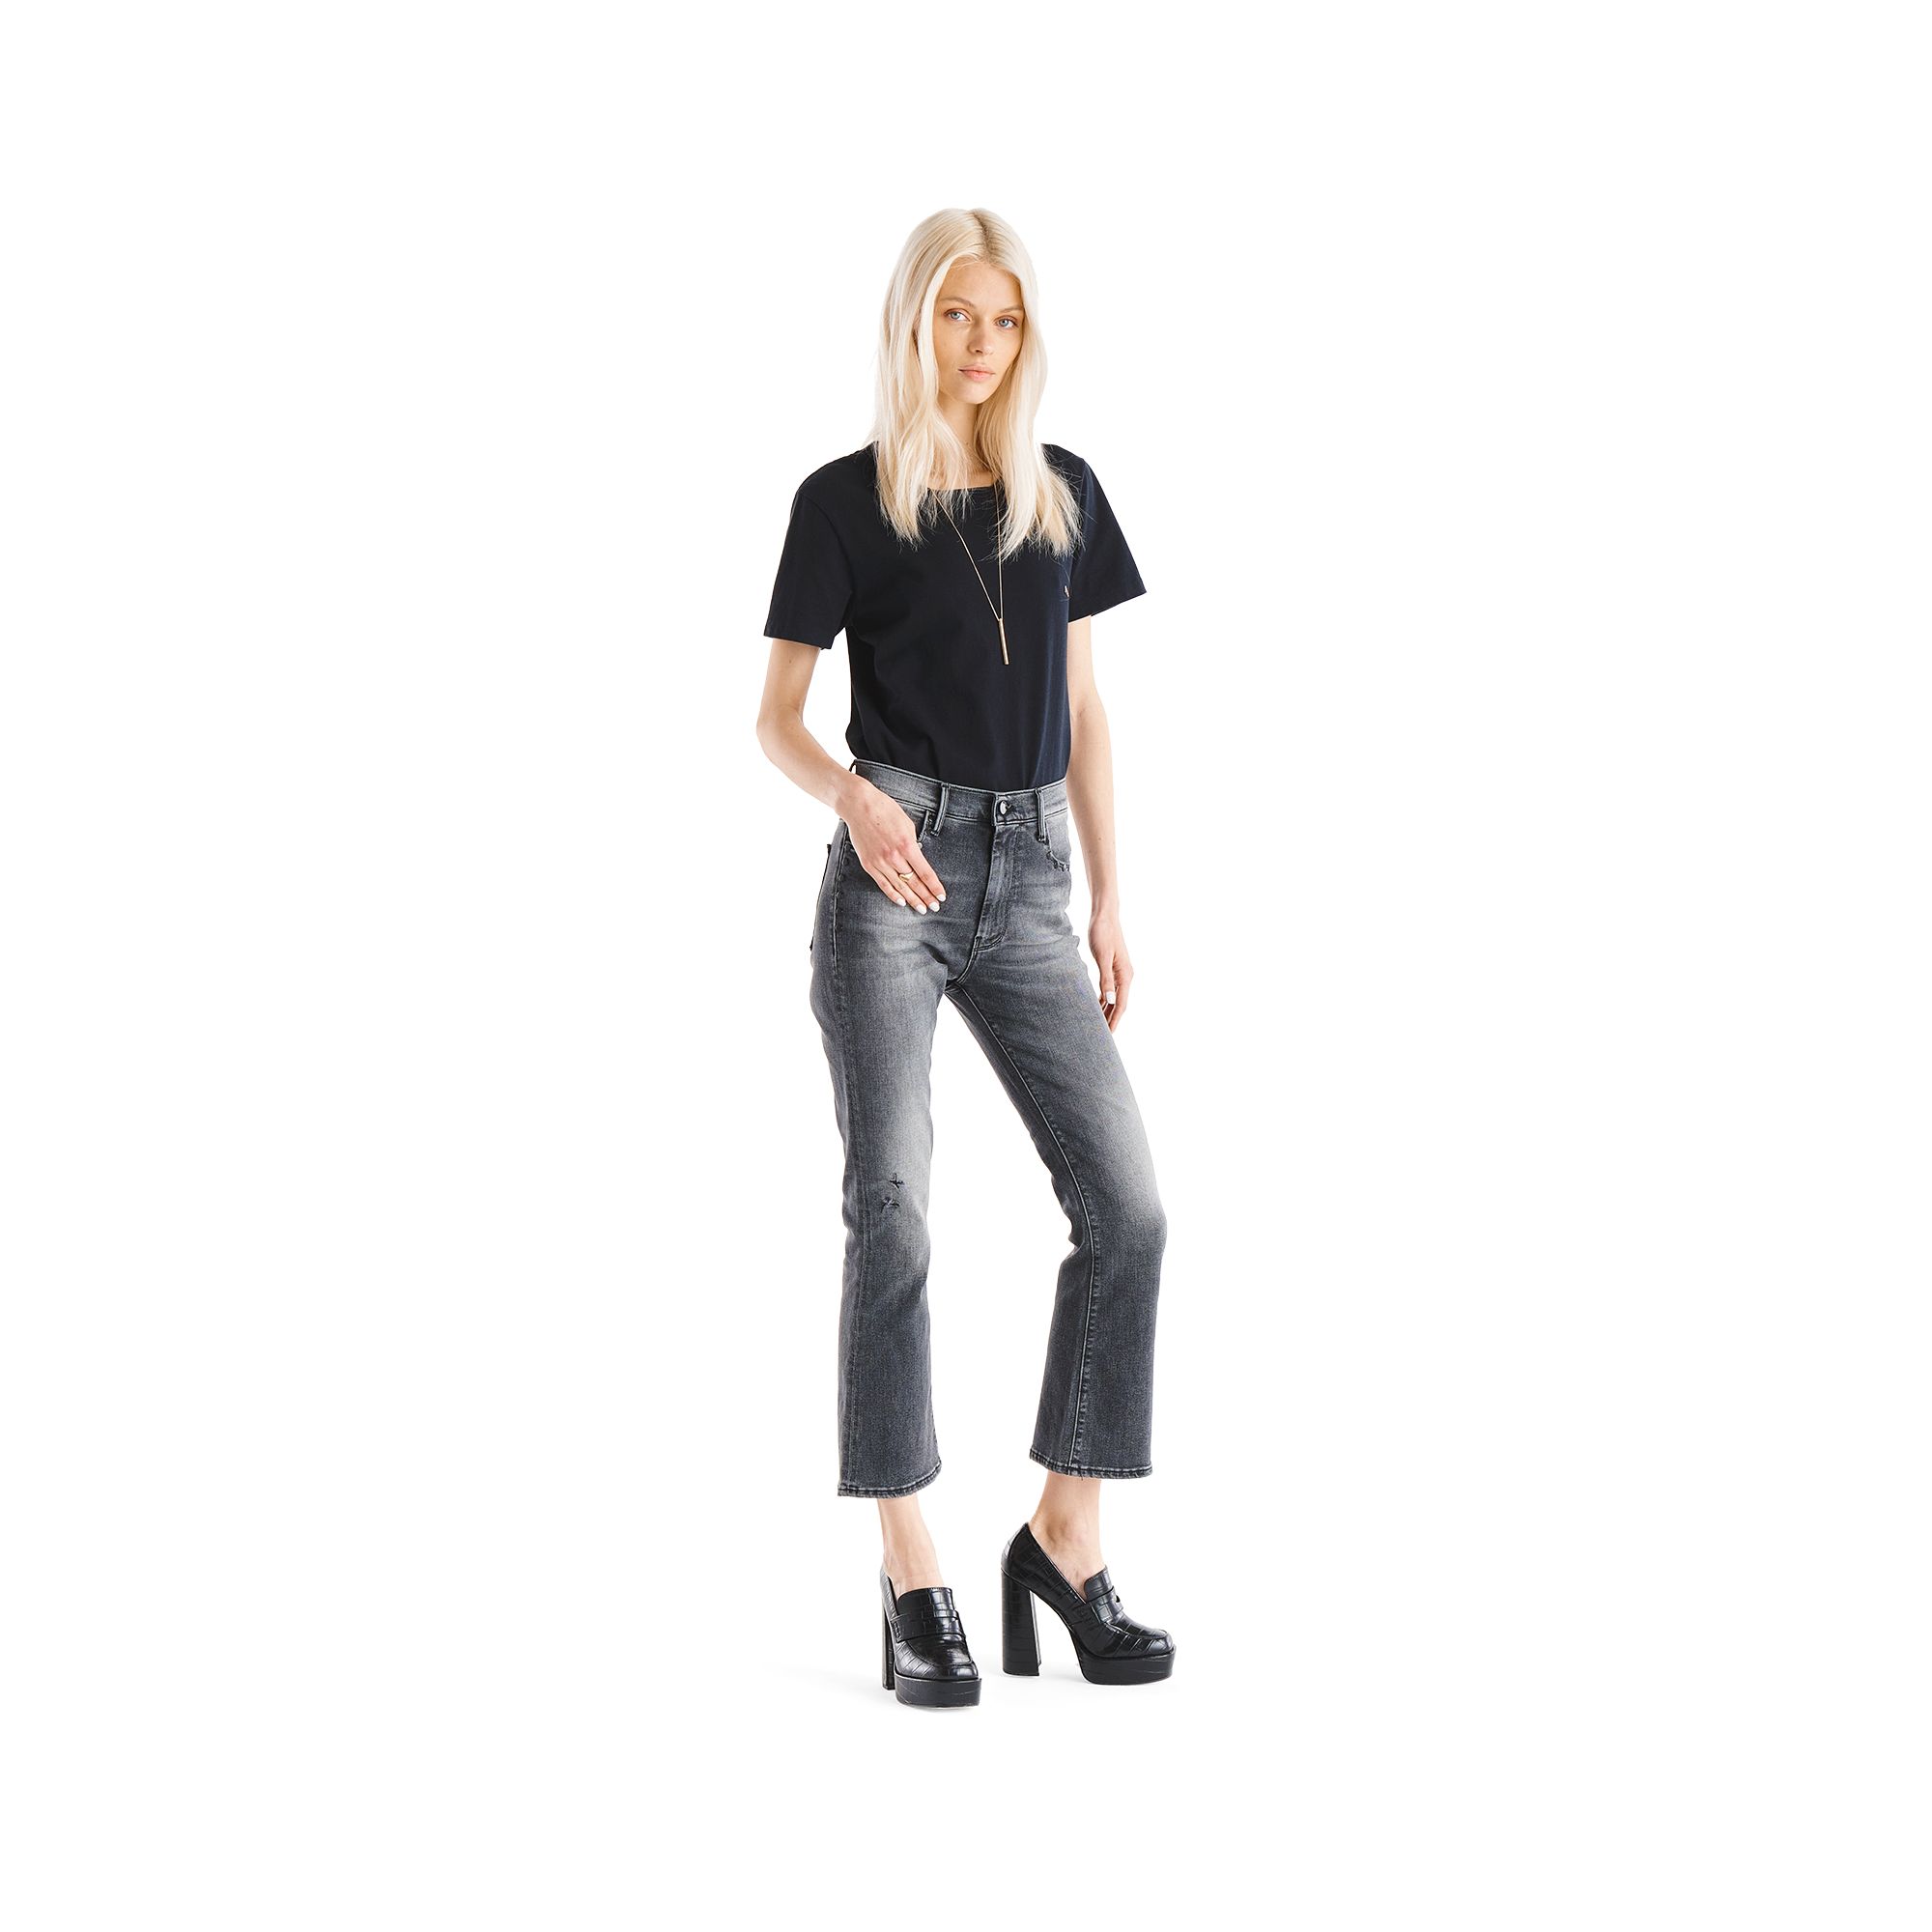 KATE CROP BOOTCUT WITH STUDS USED WASH